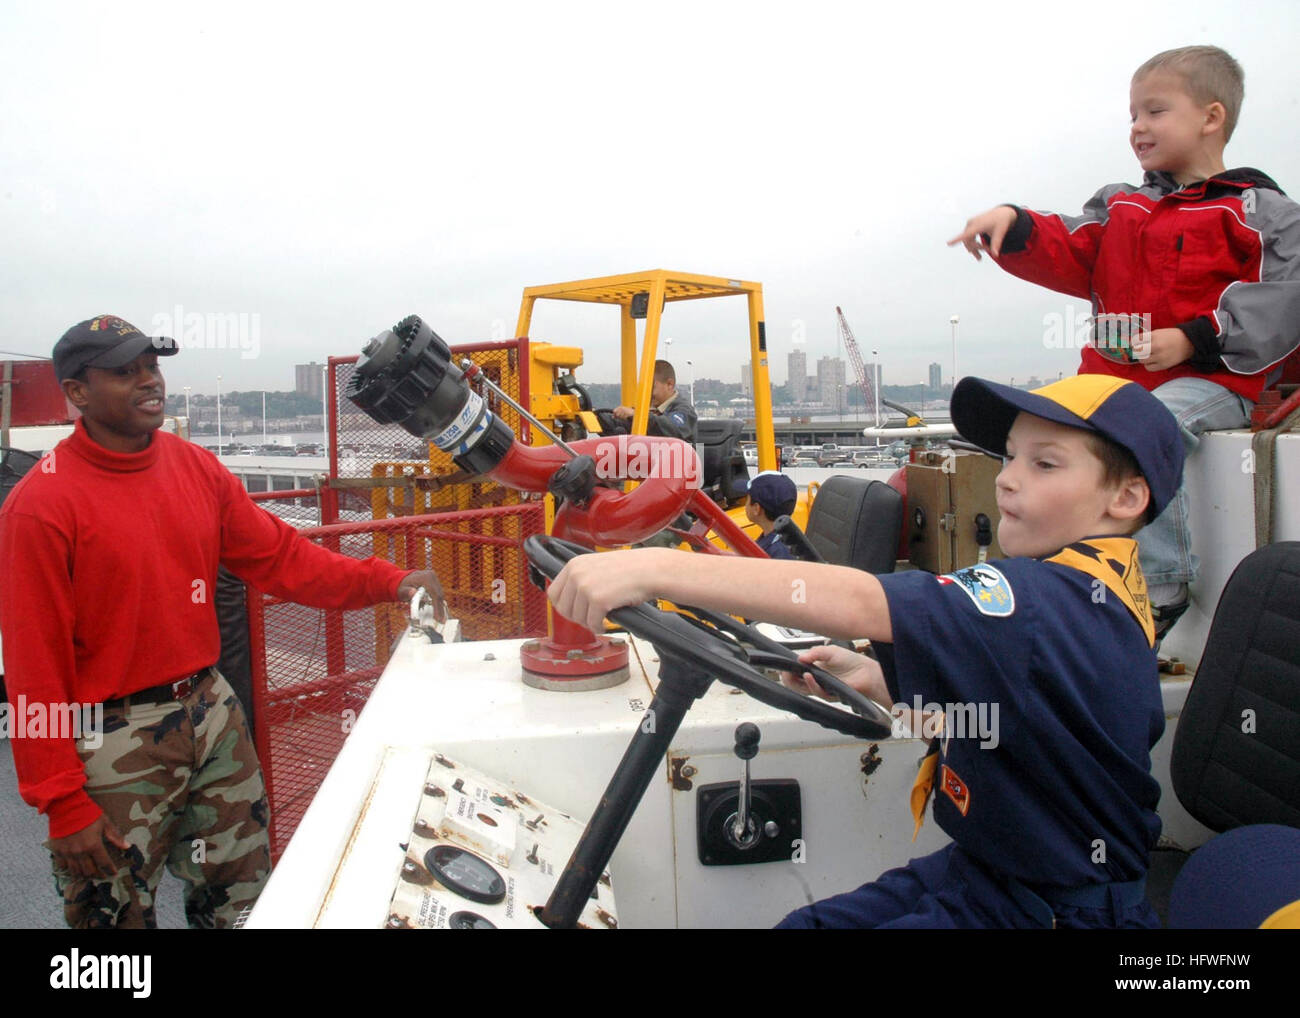 081013-N-6439C-030 NEW YORK (Oct. 13, 2008) Aviation Boatswain's Mate Handler 3rd Class Mazi Nickelson speaks to children during a tour of the amphibious assault ship USS Nassau (LHA 4). The New York residents met the crew and viewed static displays highlighting the ship's mission. Nassau is in New York to celebrate the 100th anniversary of the Great White Fleet. (U.S. Navy photo by Mass Communication Specialist 2nd Class Amanda Clayton/Released) US Navy 081013-N-6439C-030 Aviation Boatswain's Mate Handler 3rd Class Mazi Nickelson speaks to children during a tour of the amphibious assault ship Stock Photo